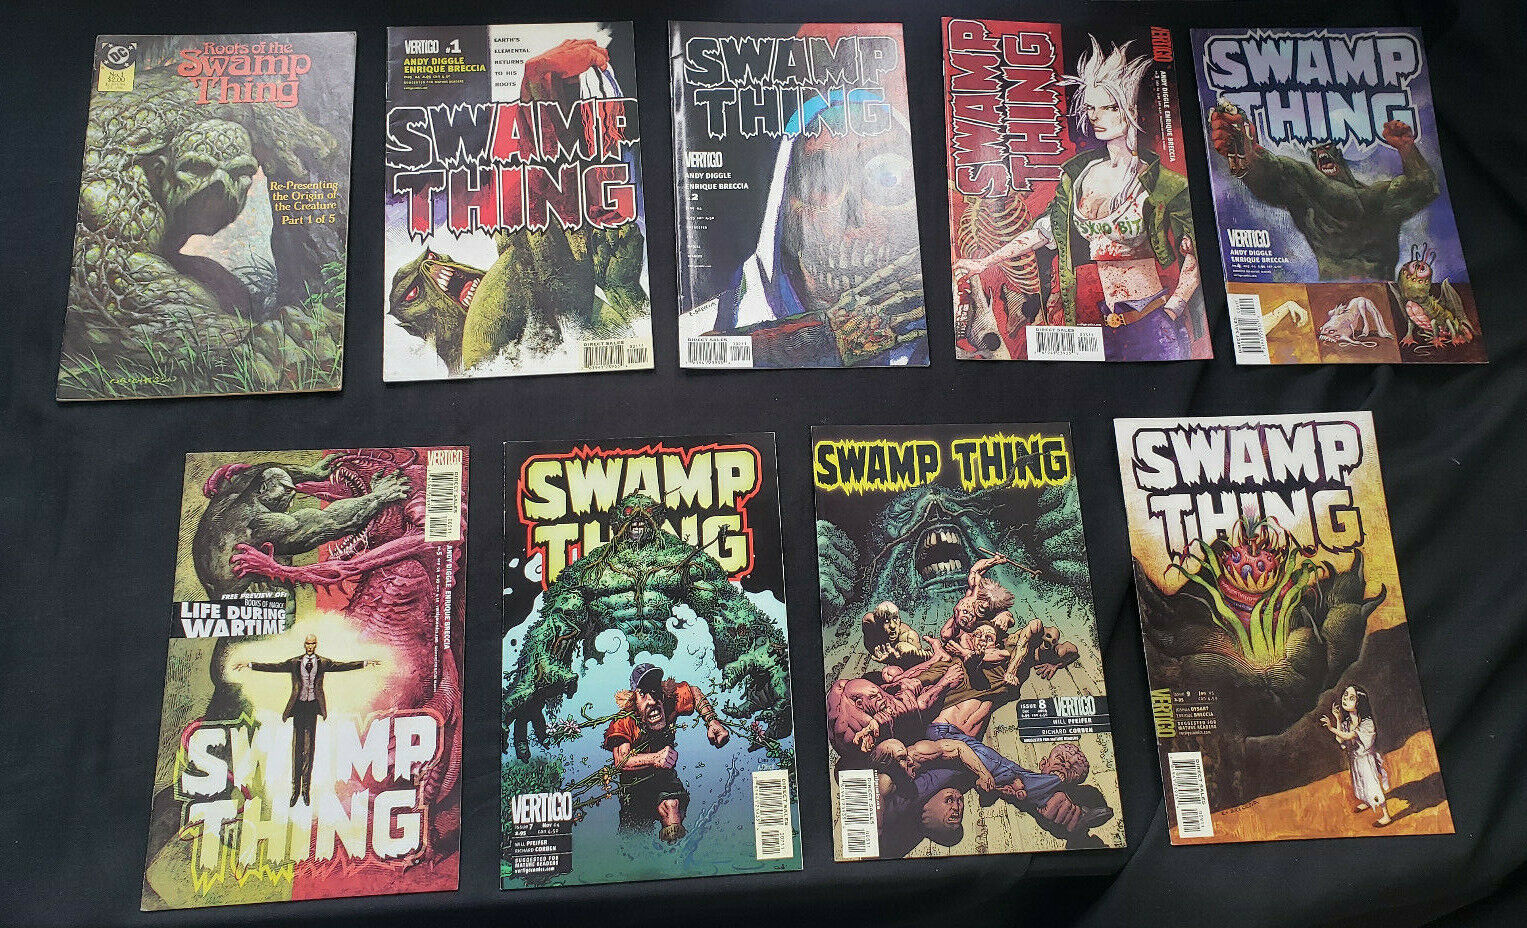 SWAMP THING 9PC (VF) RE-PRESENTING THE ORIGIN OF THE CREATURE PART 1: 1986-2005